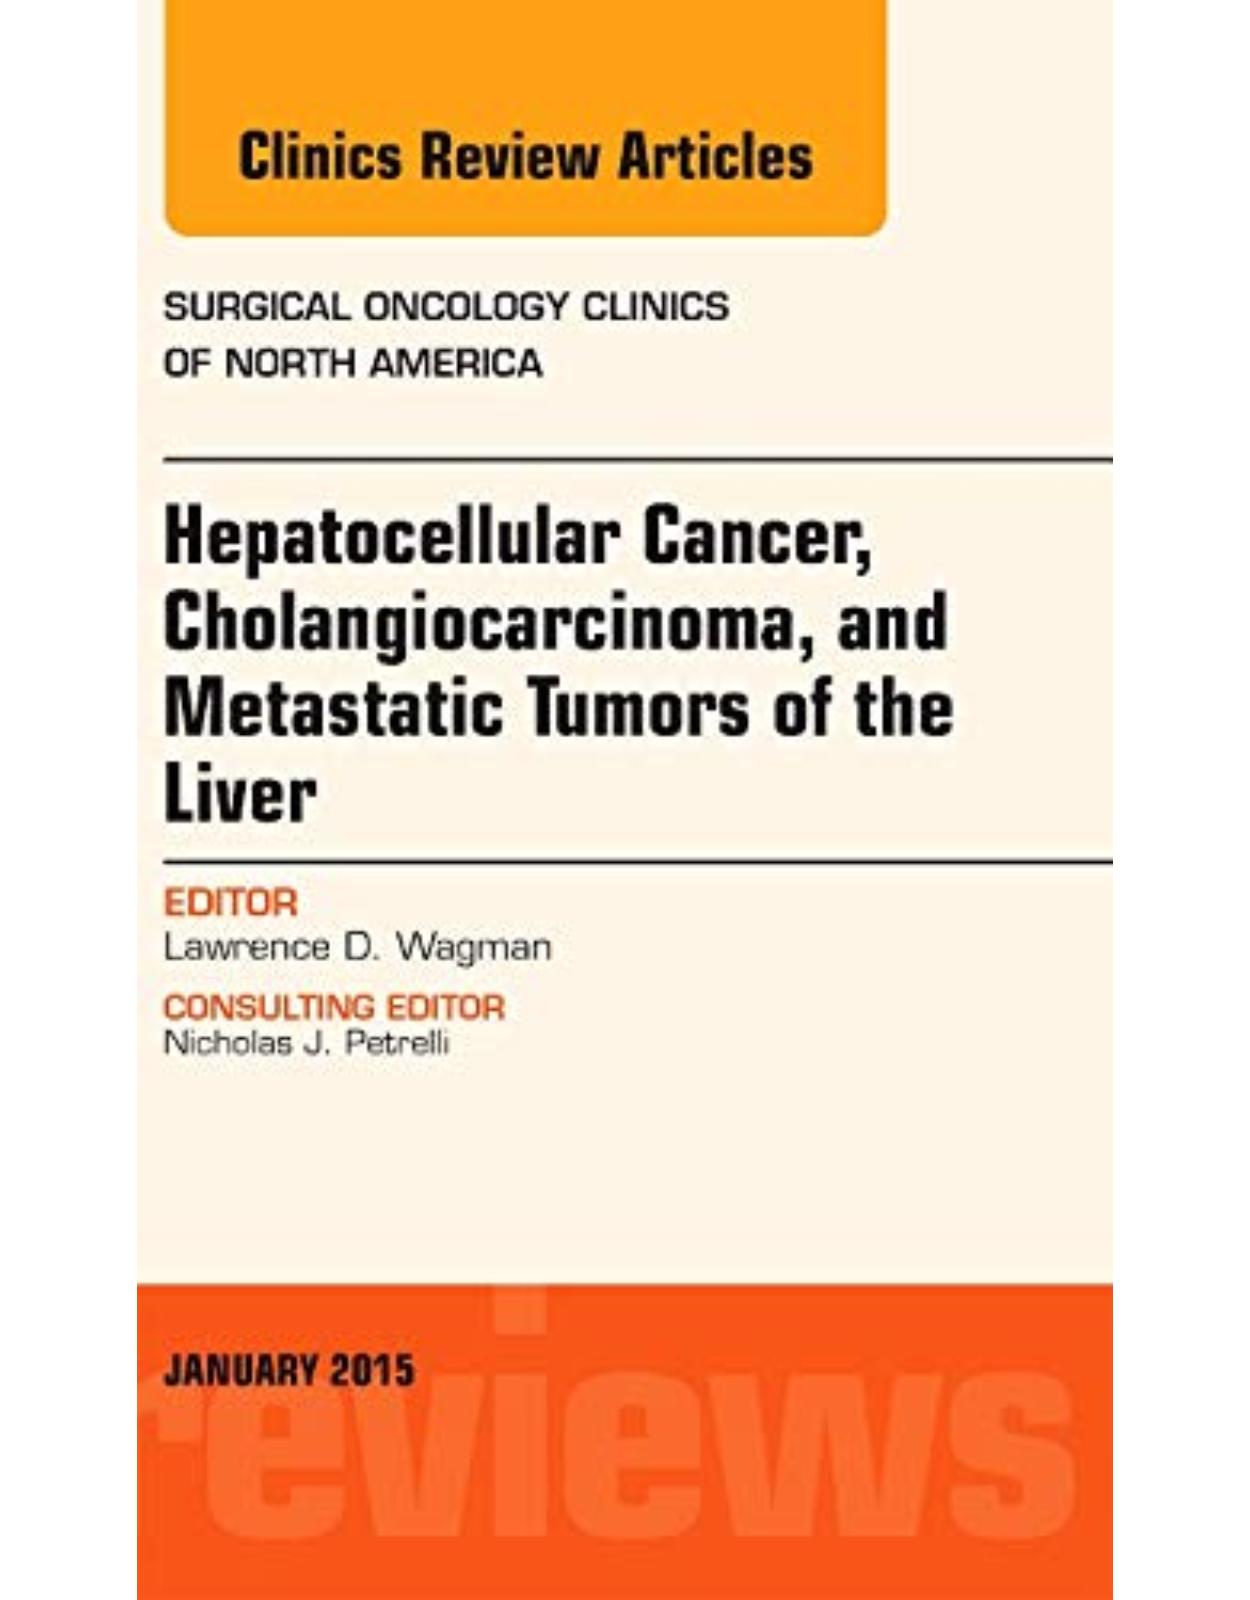 Hepatocellular Cancer, Cholangiocarcinoma, and Metastatic Tumors of the Liver, An Issue of Surgical Oncology Clinics of North America, Volume 24-1